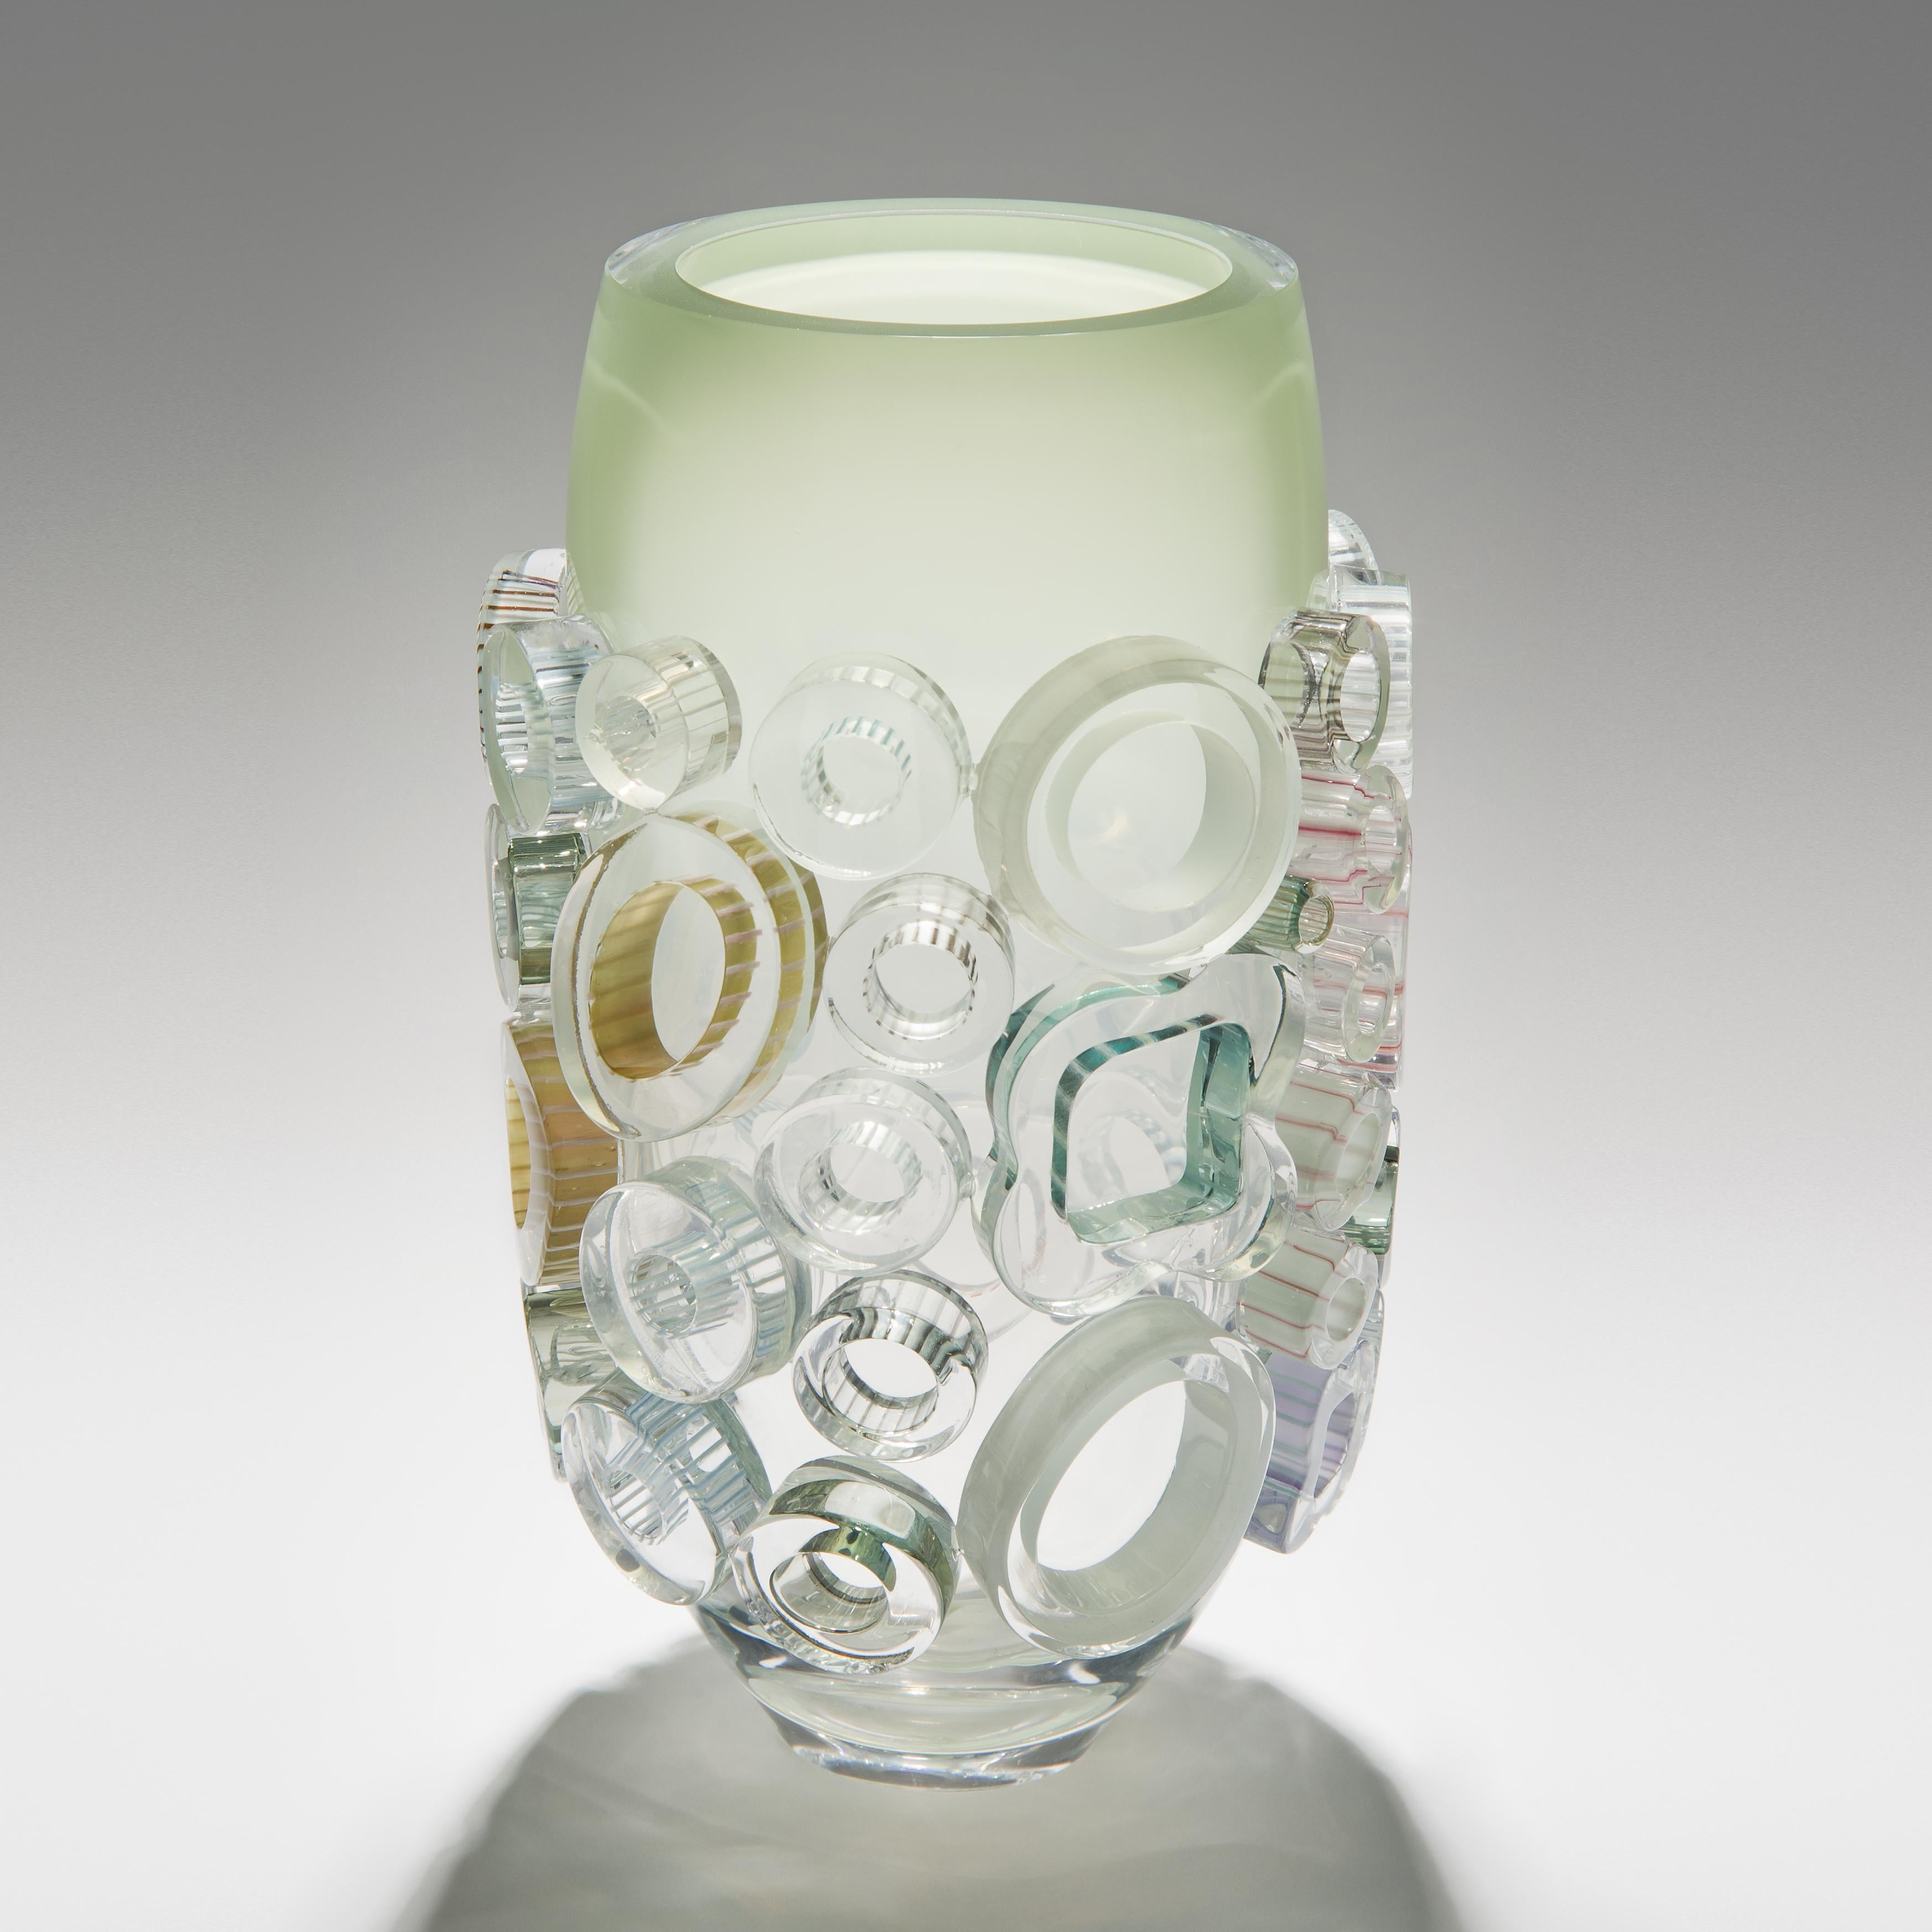 Bright field Isar Green is a unique hand blown and crafted vase by the German artist, Sabine Lintzen. The initial inner form is free-blown and adorned with various individually shaped murrini, all created in a mix of colored glass in celadon, green,